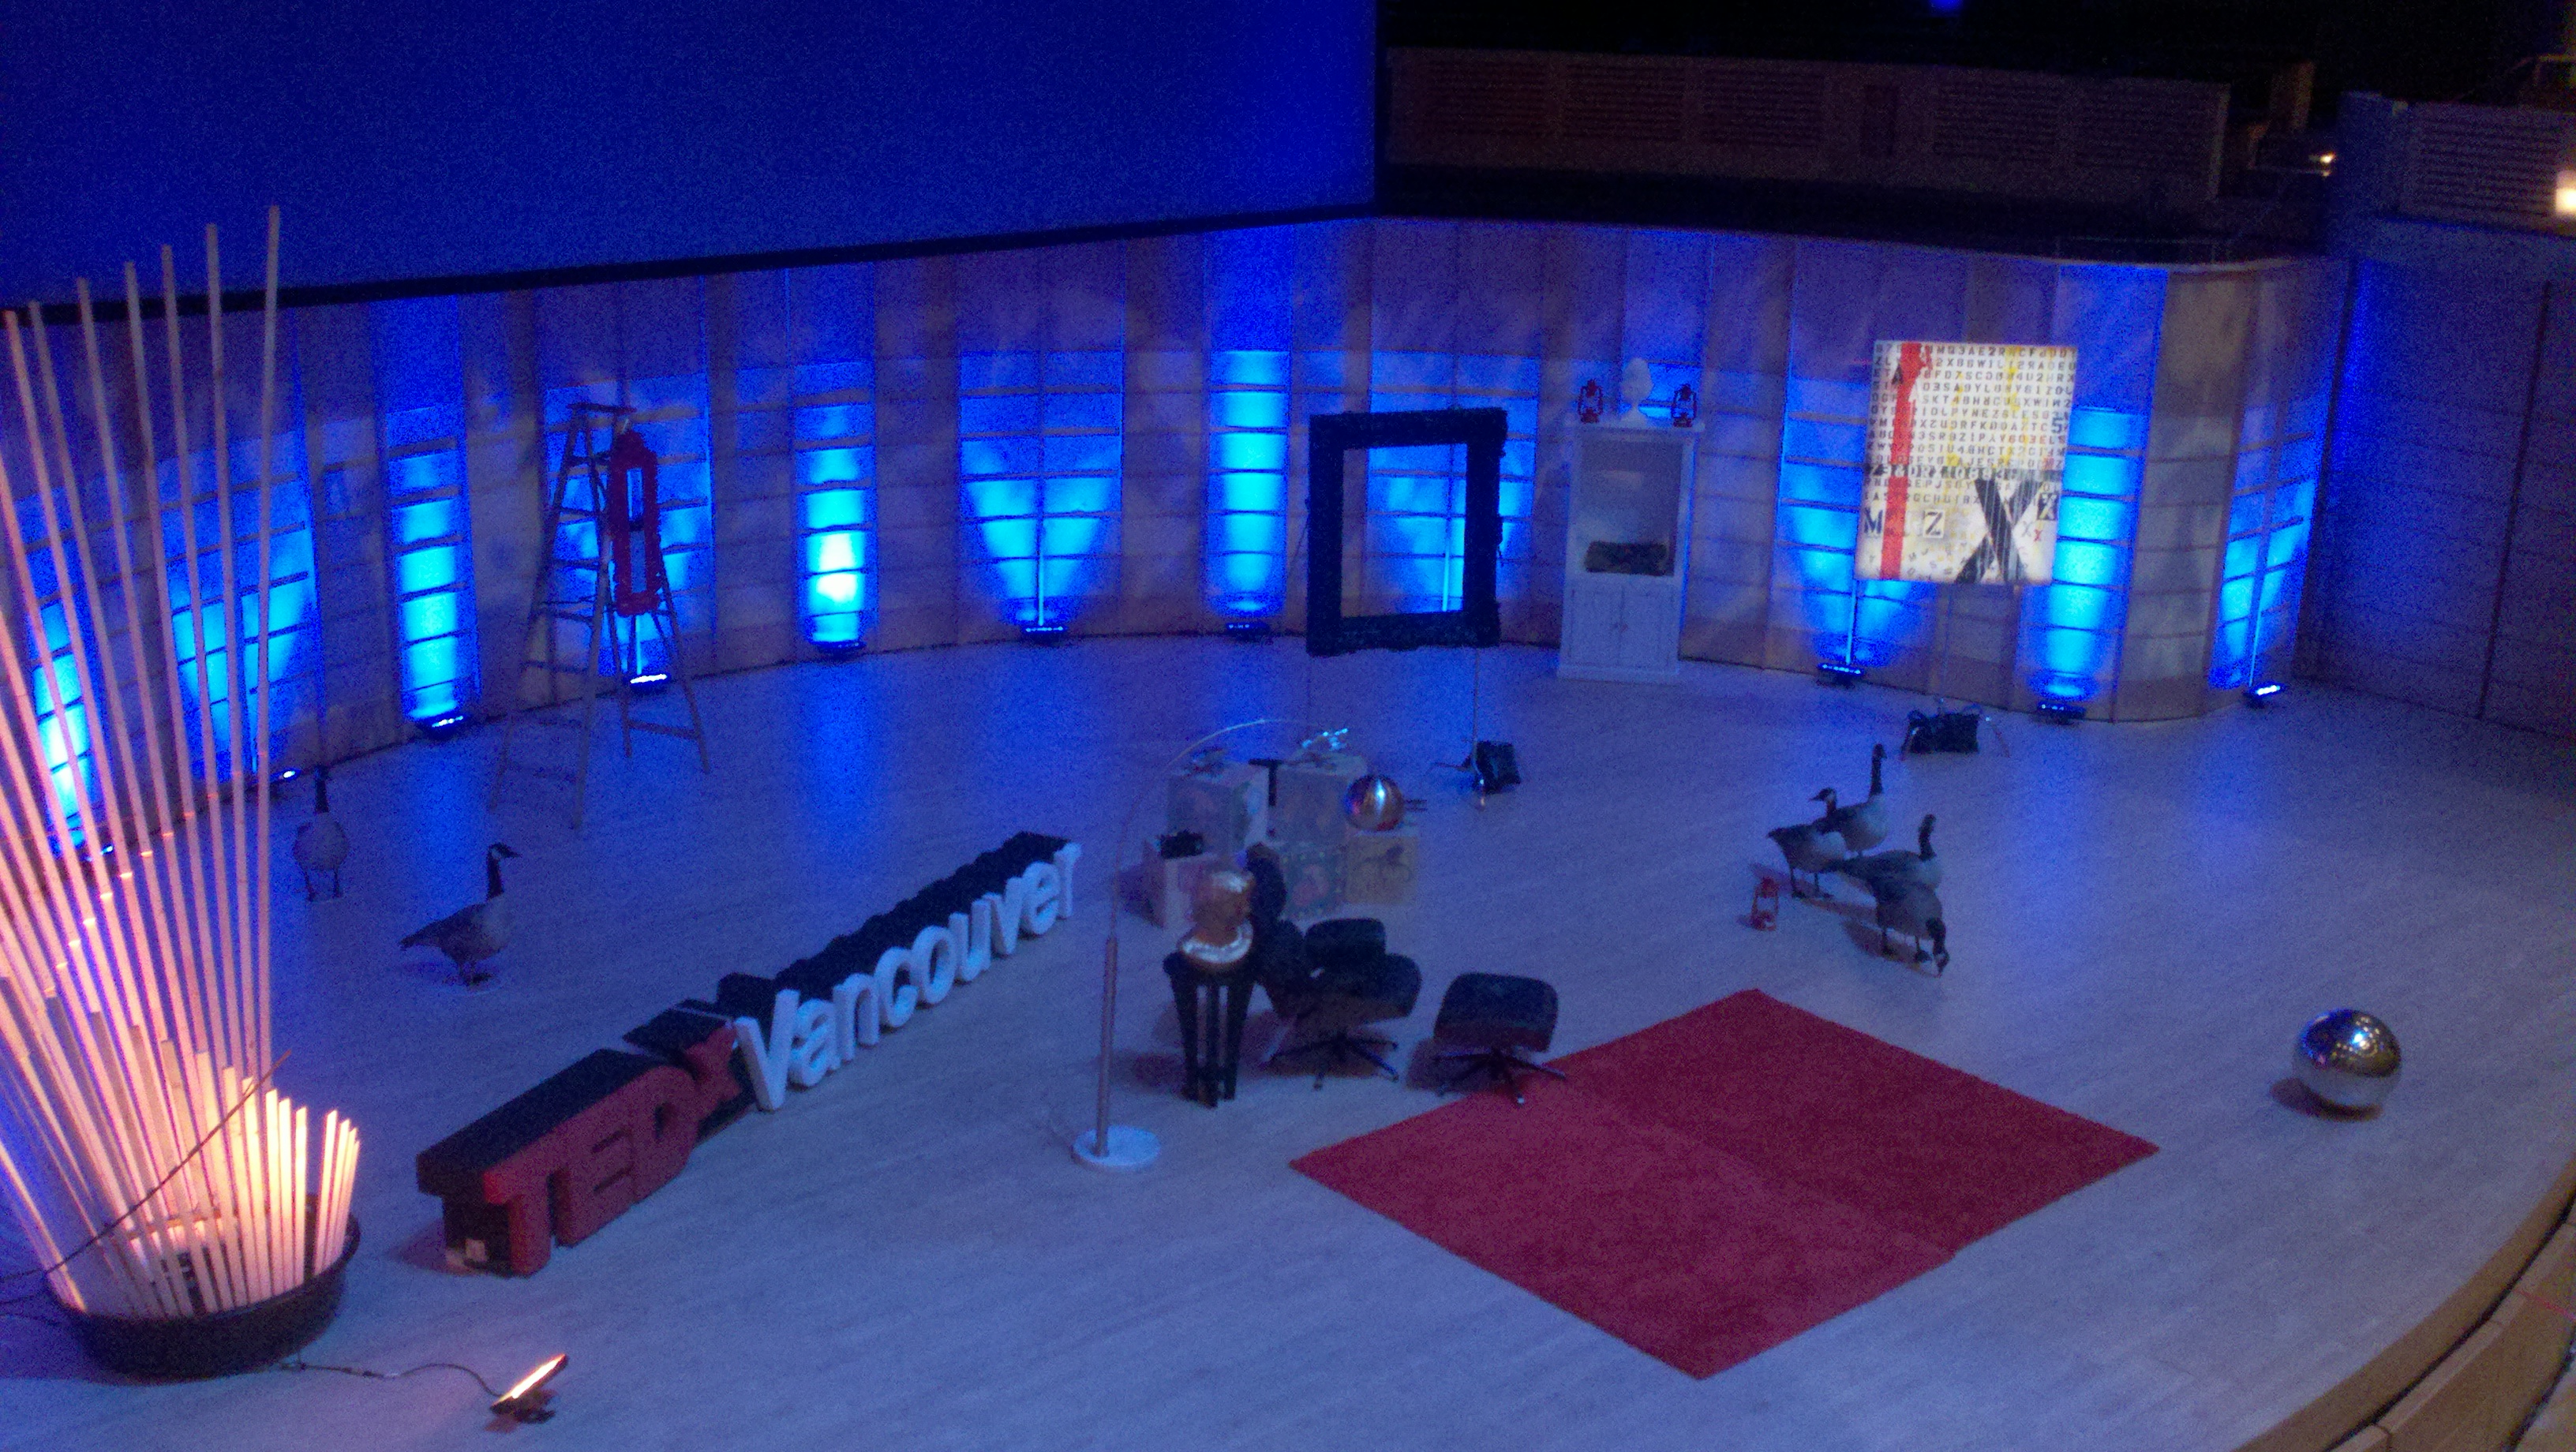 Tedx Stage